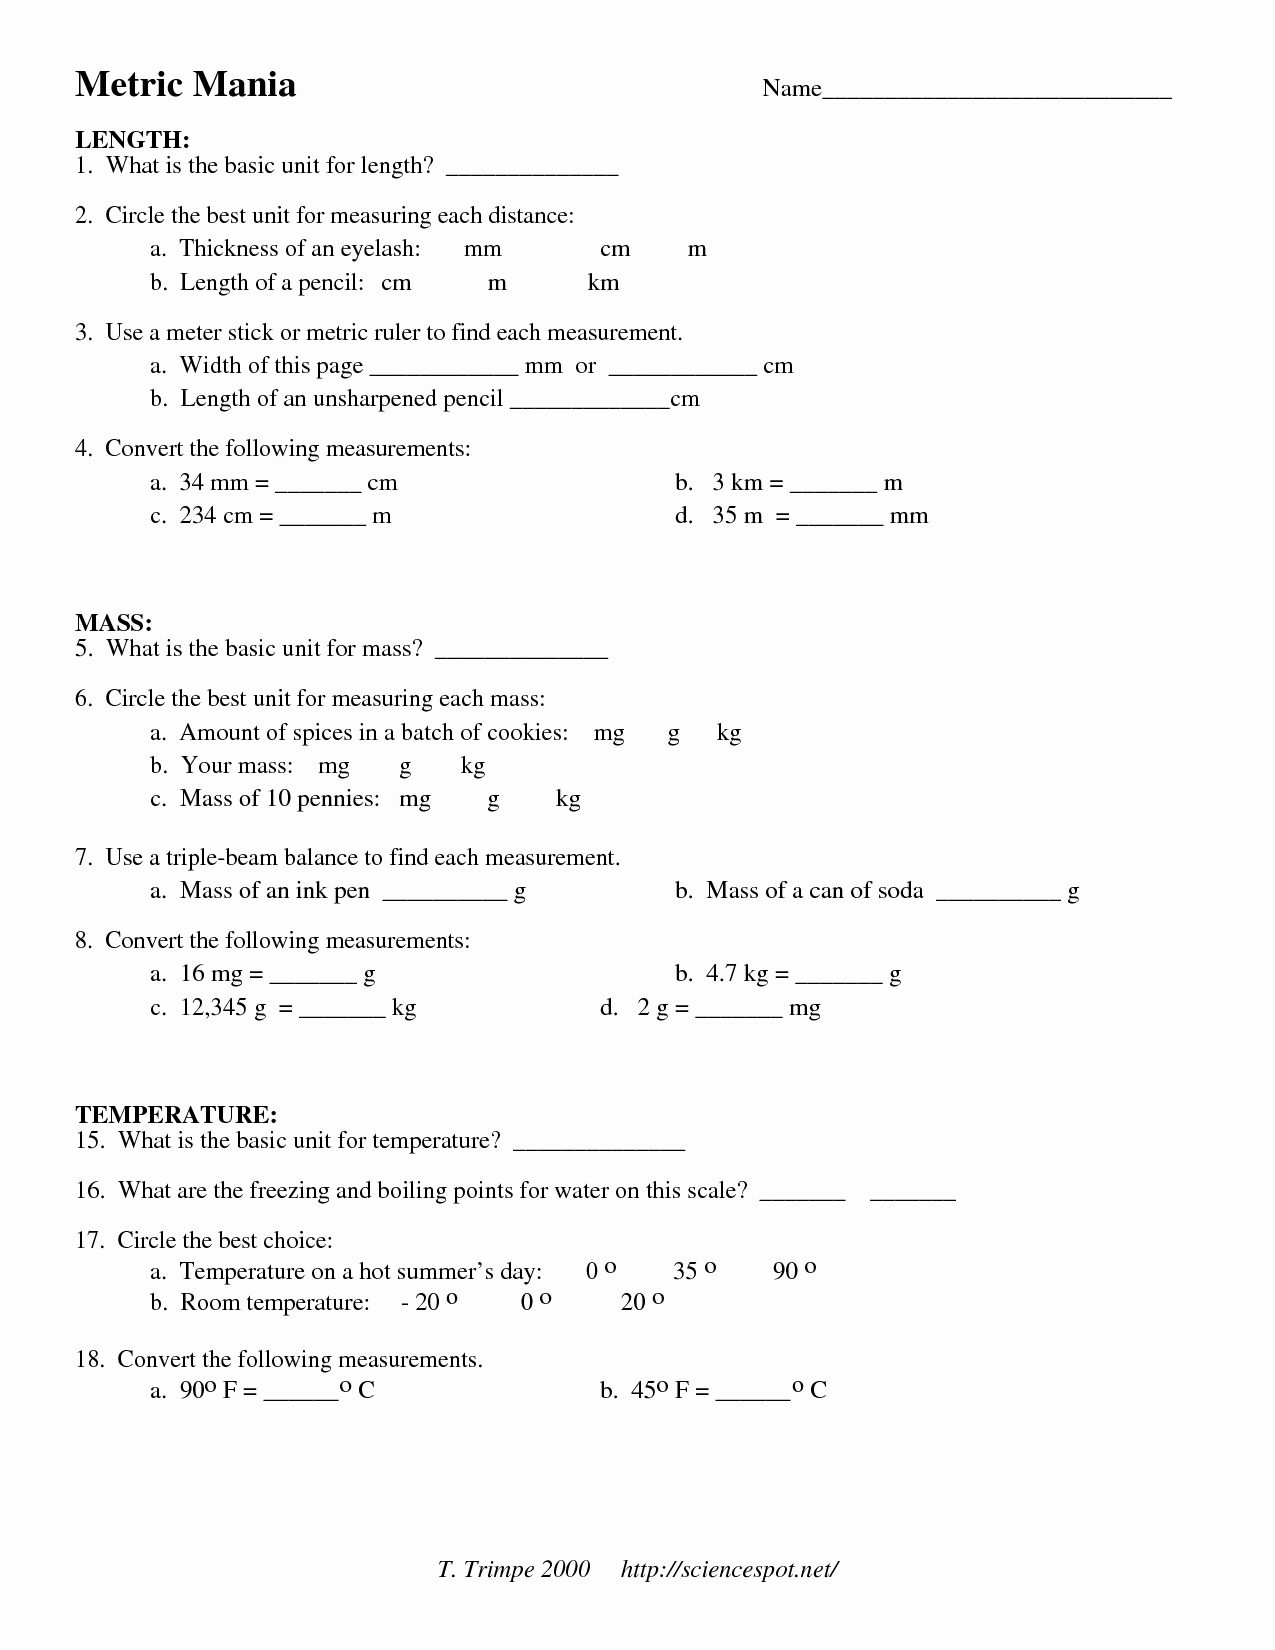 Metric Mania Worksheet Answers Unique 16 Best Of Mineral Mania Worksheet Answers to